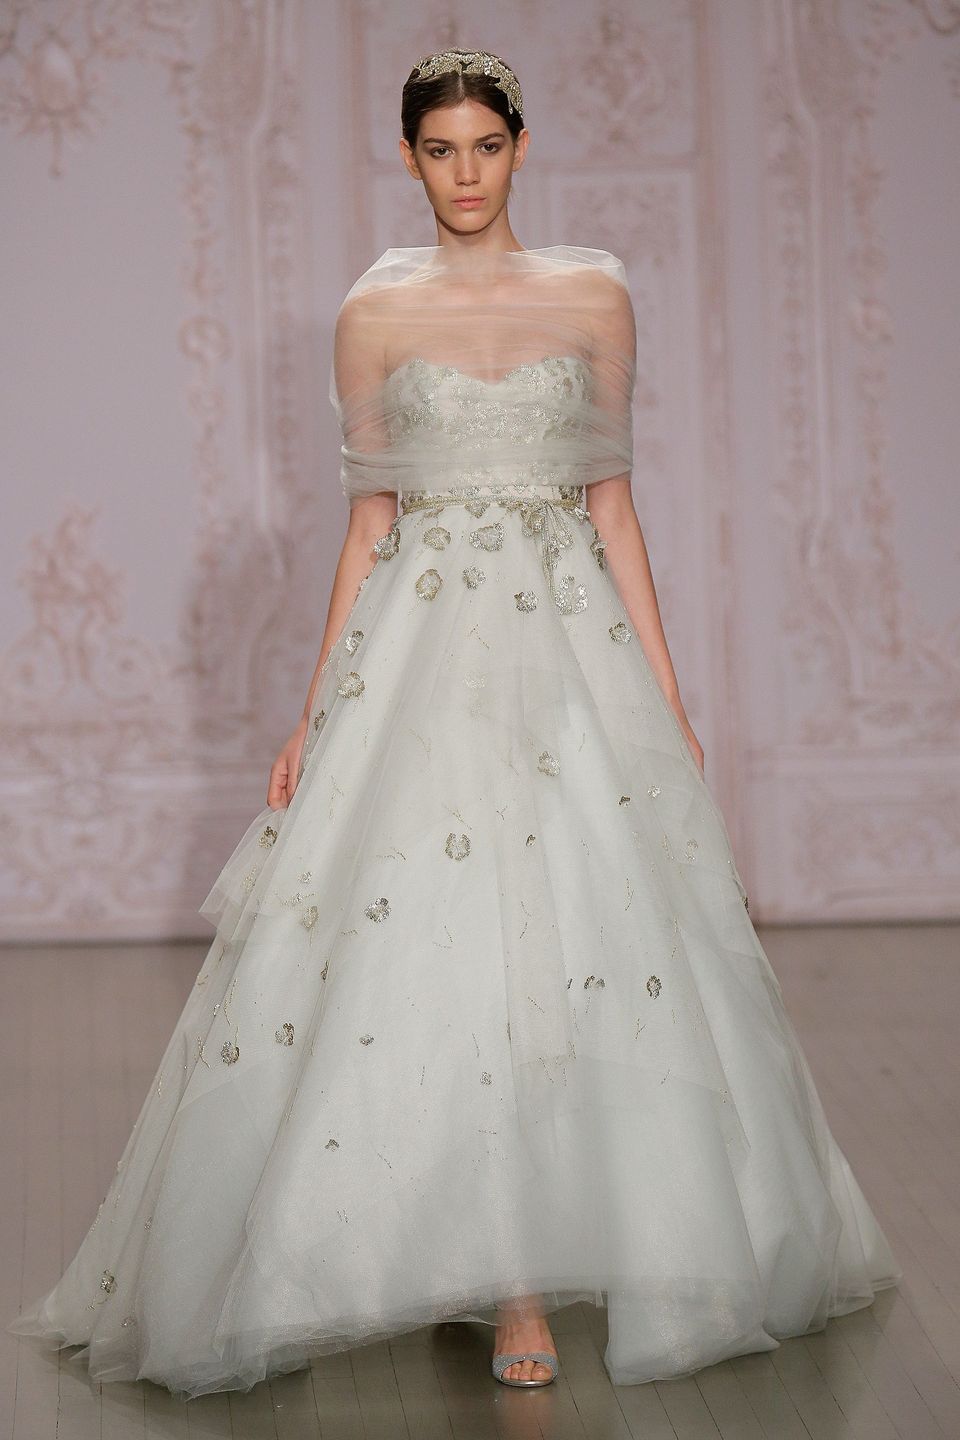 Top Wedding Dress Trends From The Fall 2015 Bridal Runways | HuffPost Life